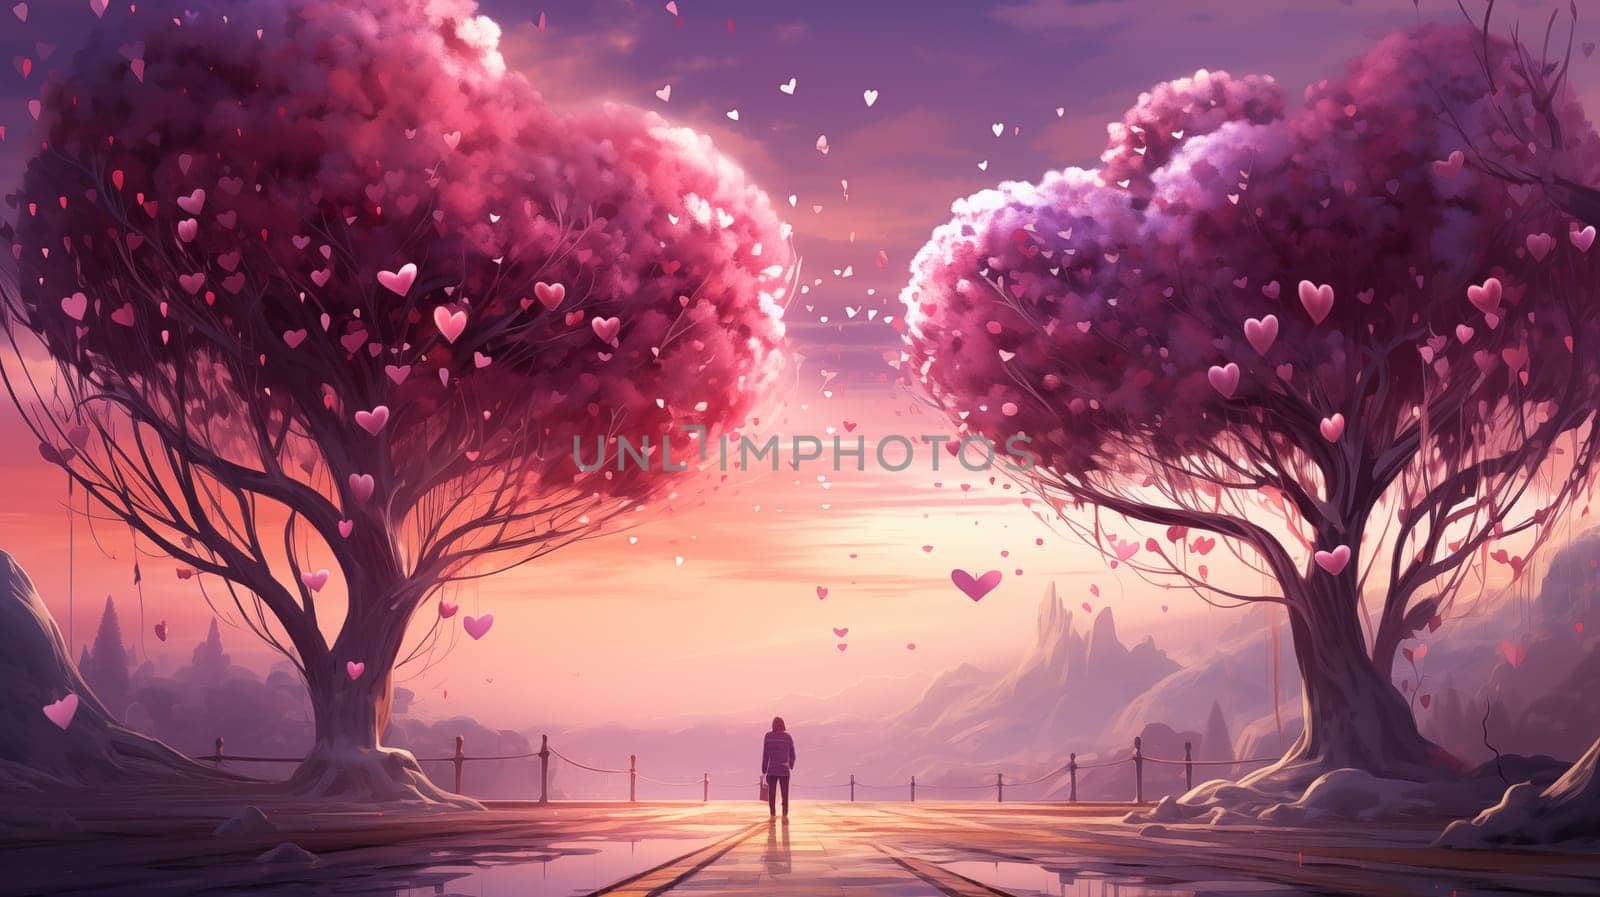 Solitary figure admiring heart-shaped foliage on twin trees against a pastel sunset. by Zakharova